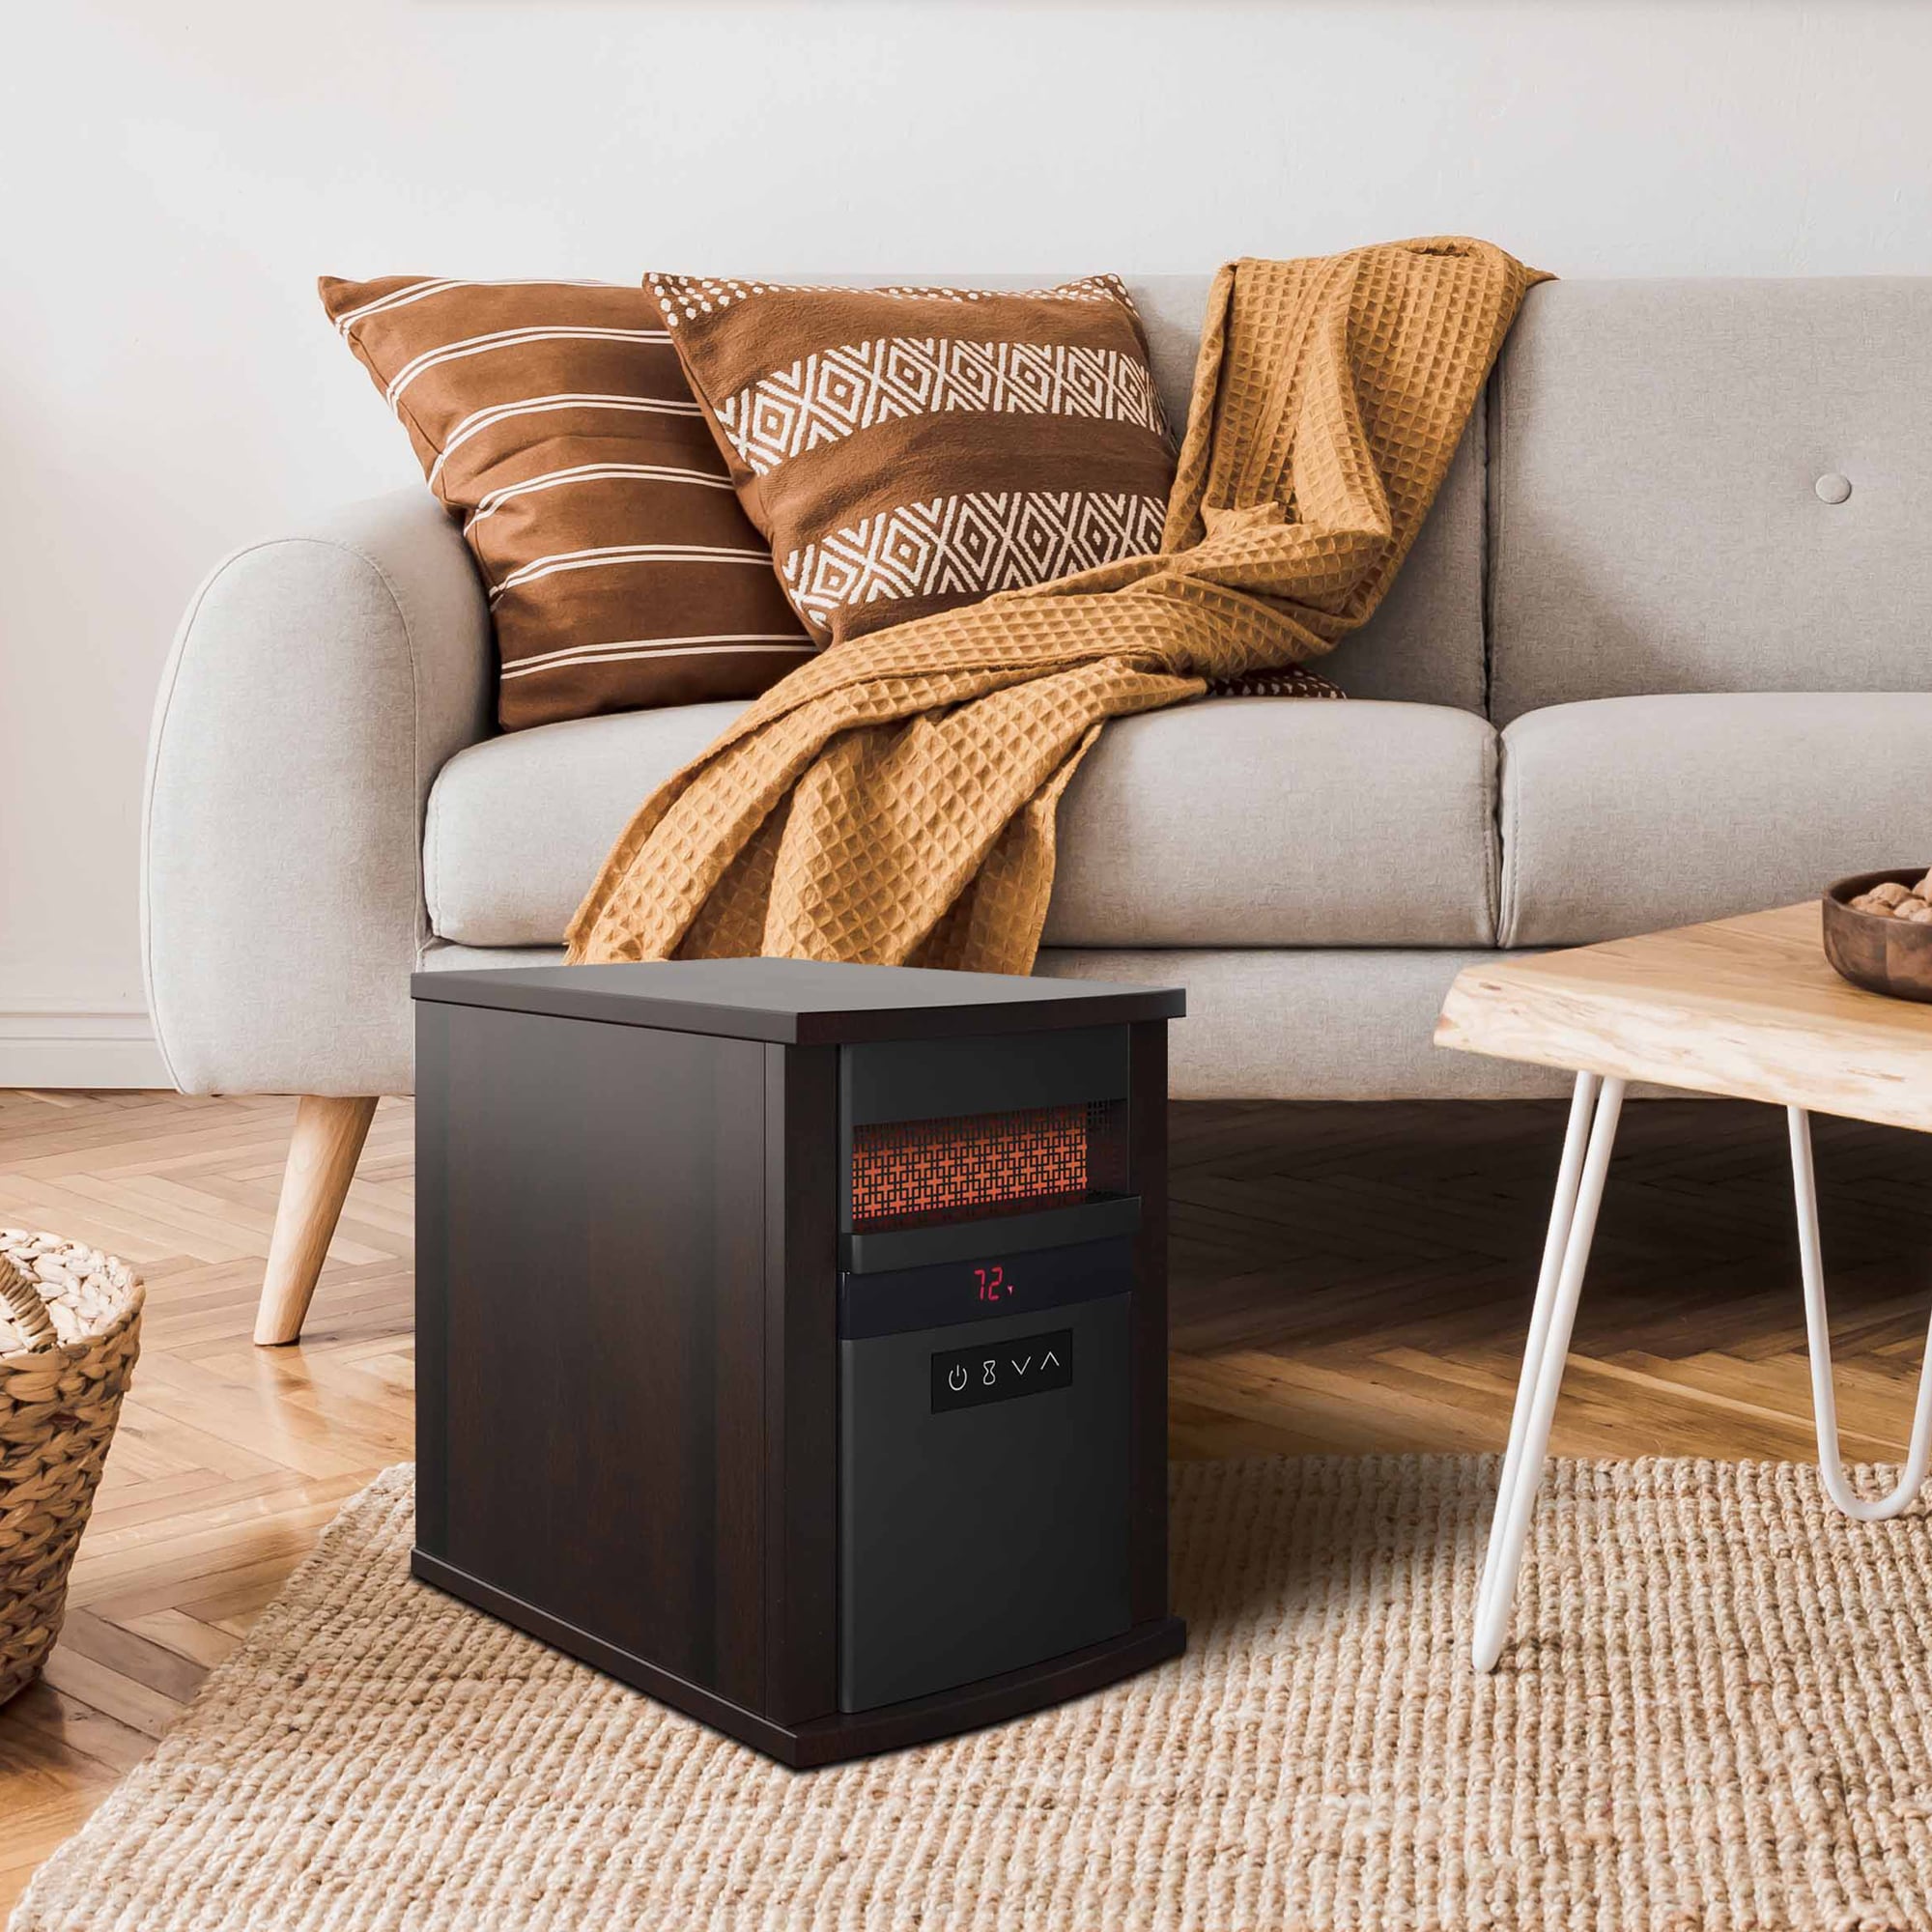 13 bestselling space heaters that won't break the bank - TODAY